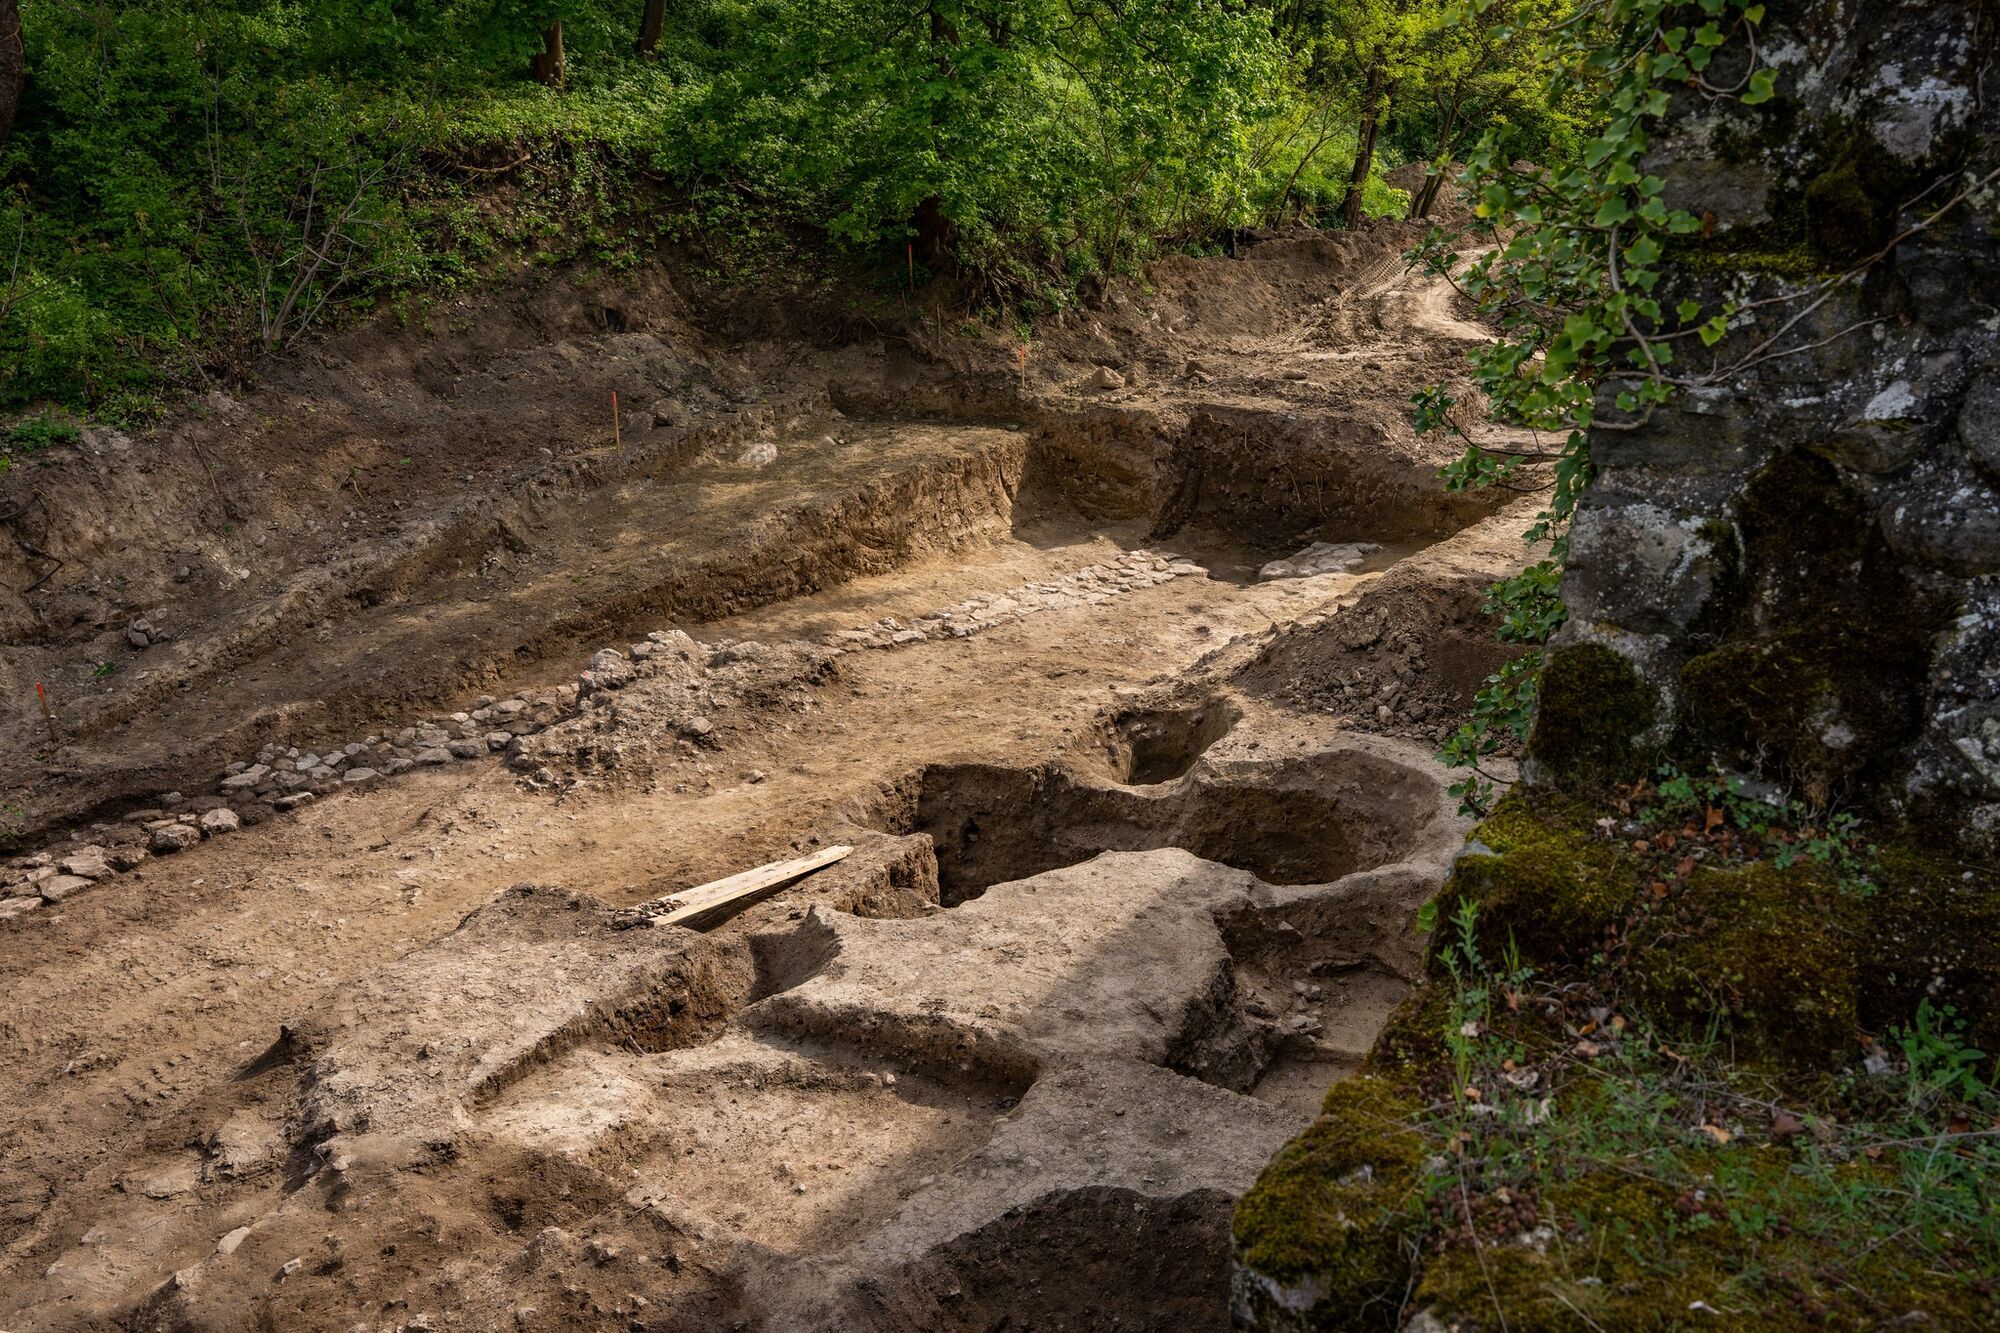 Right under the tennis court: lost 14th century Church of the Virgin Mary found in Hungary (photo)